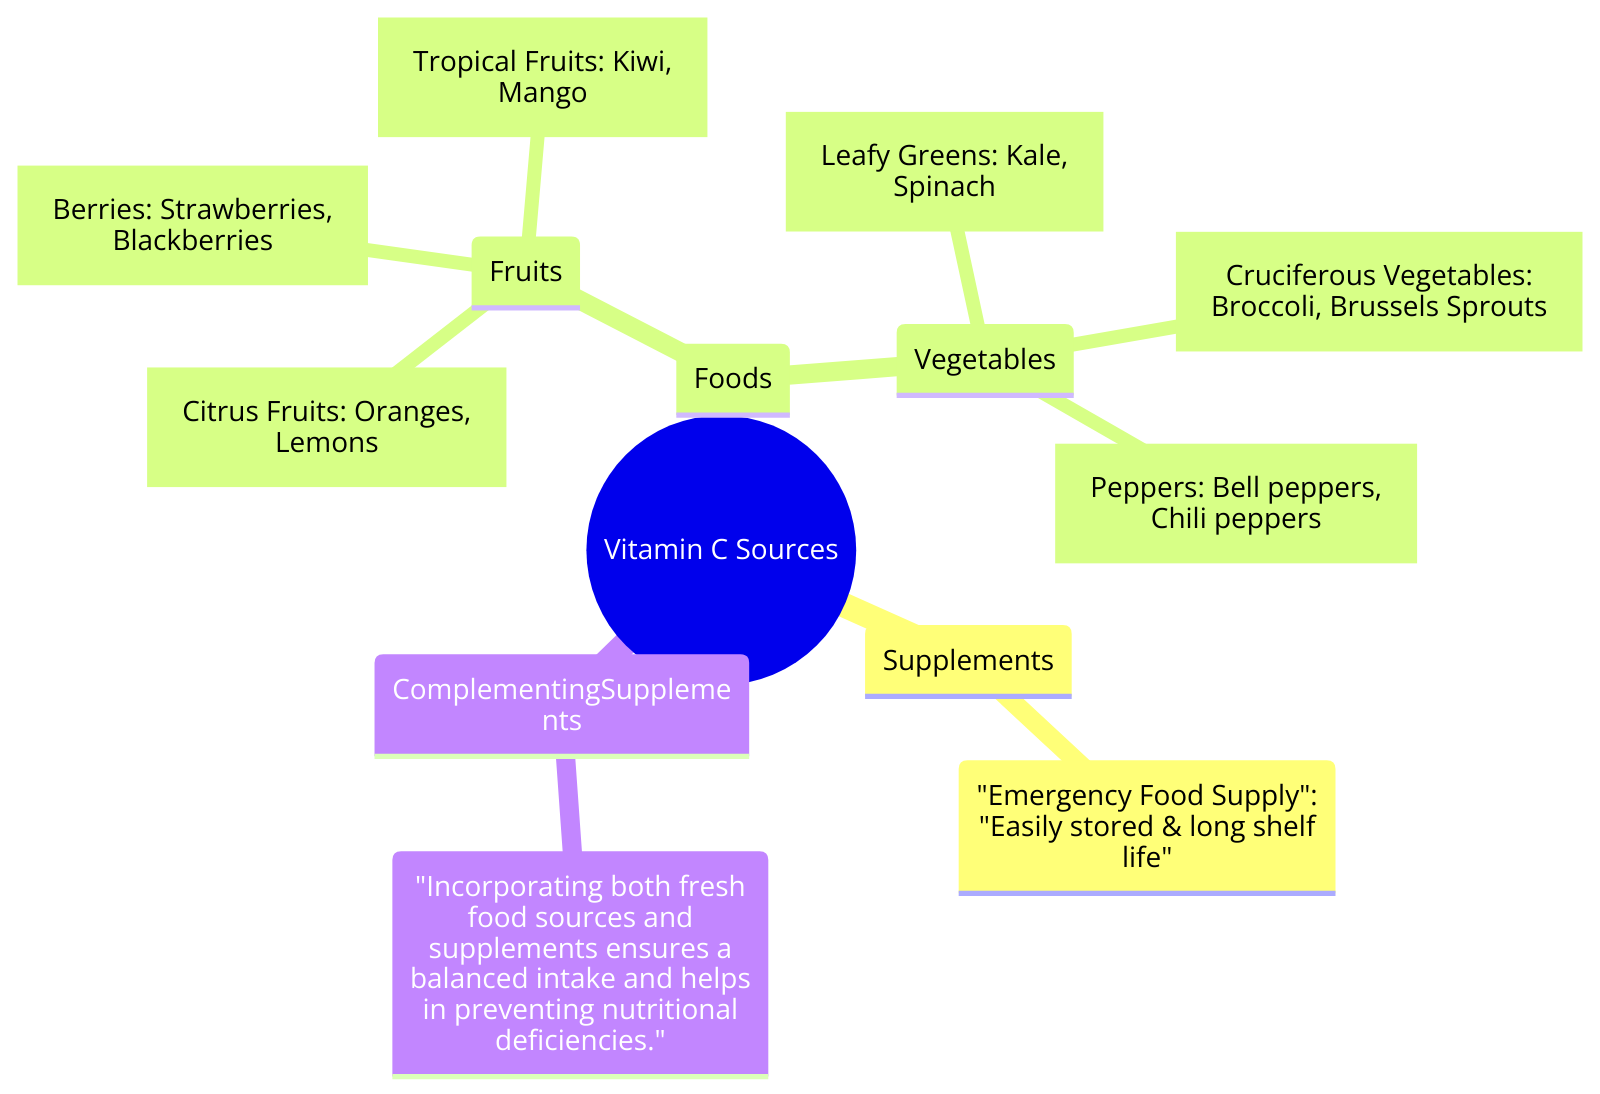 various food sources of vitamin C and how these can complement vitamin supplements in an emergency food supply